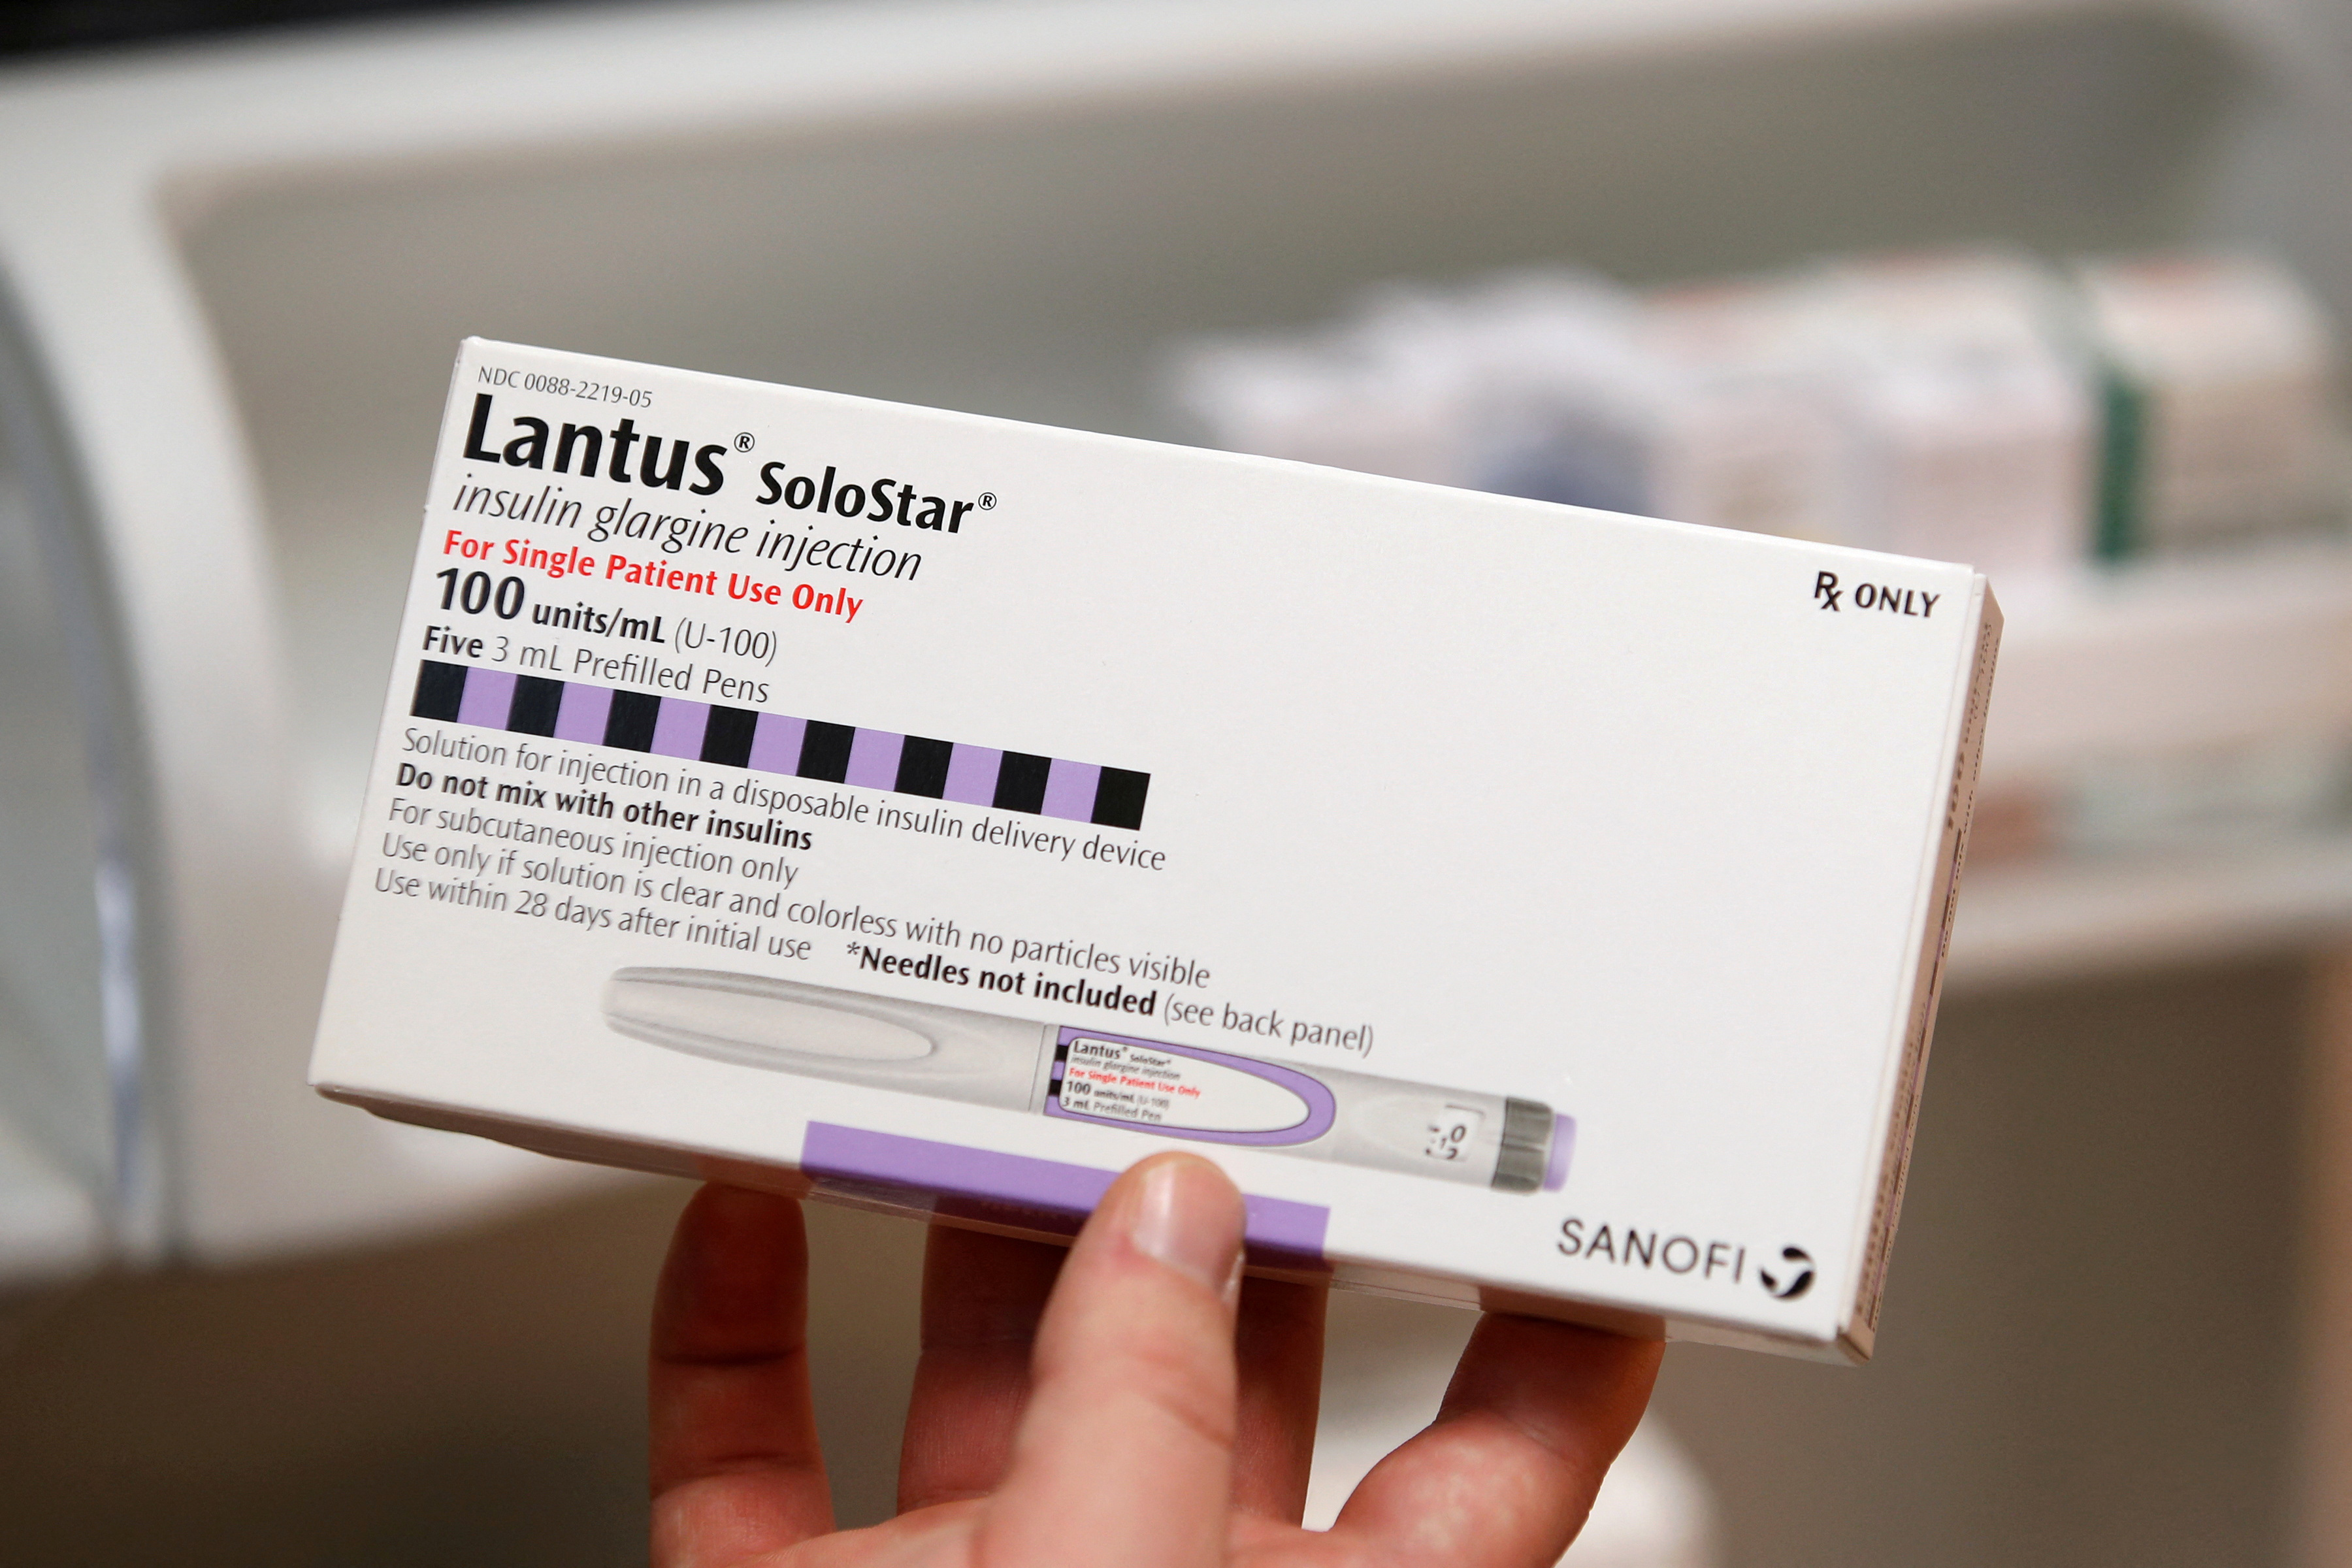 A pharmacist holds a box of the drug Lantus SoloStar, made by Sanofi Pharmaceutical, at a pharmacy in Provo